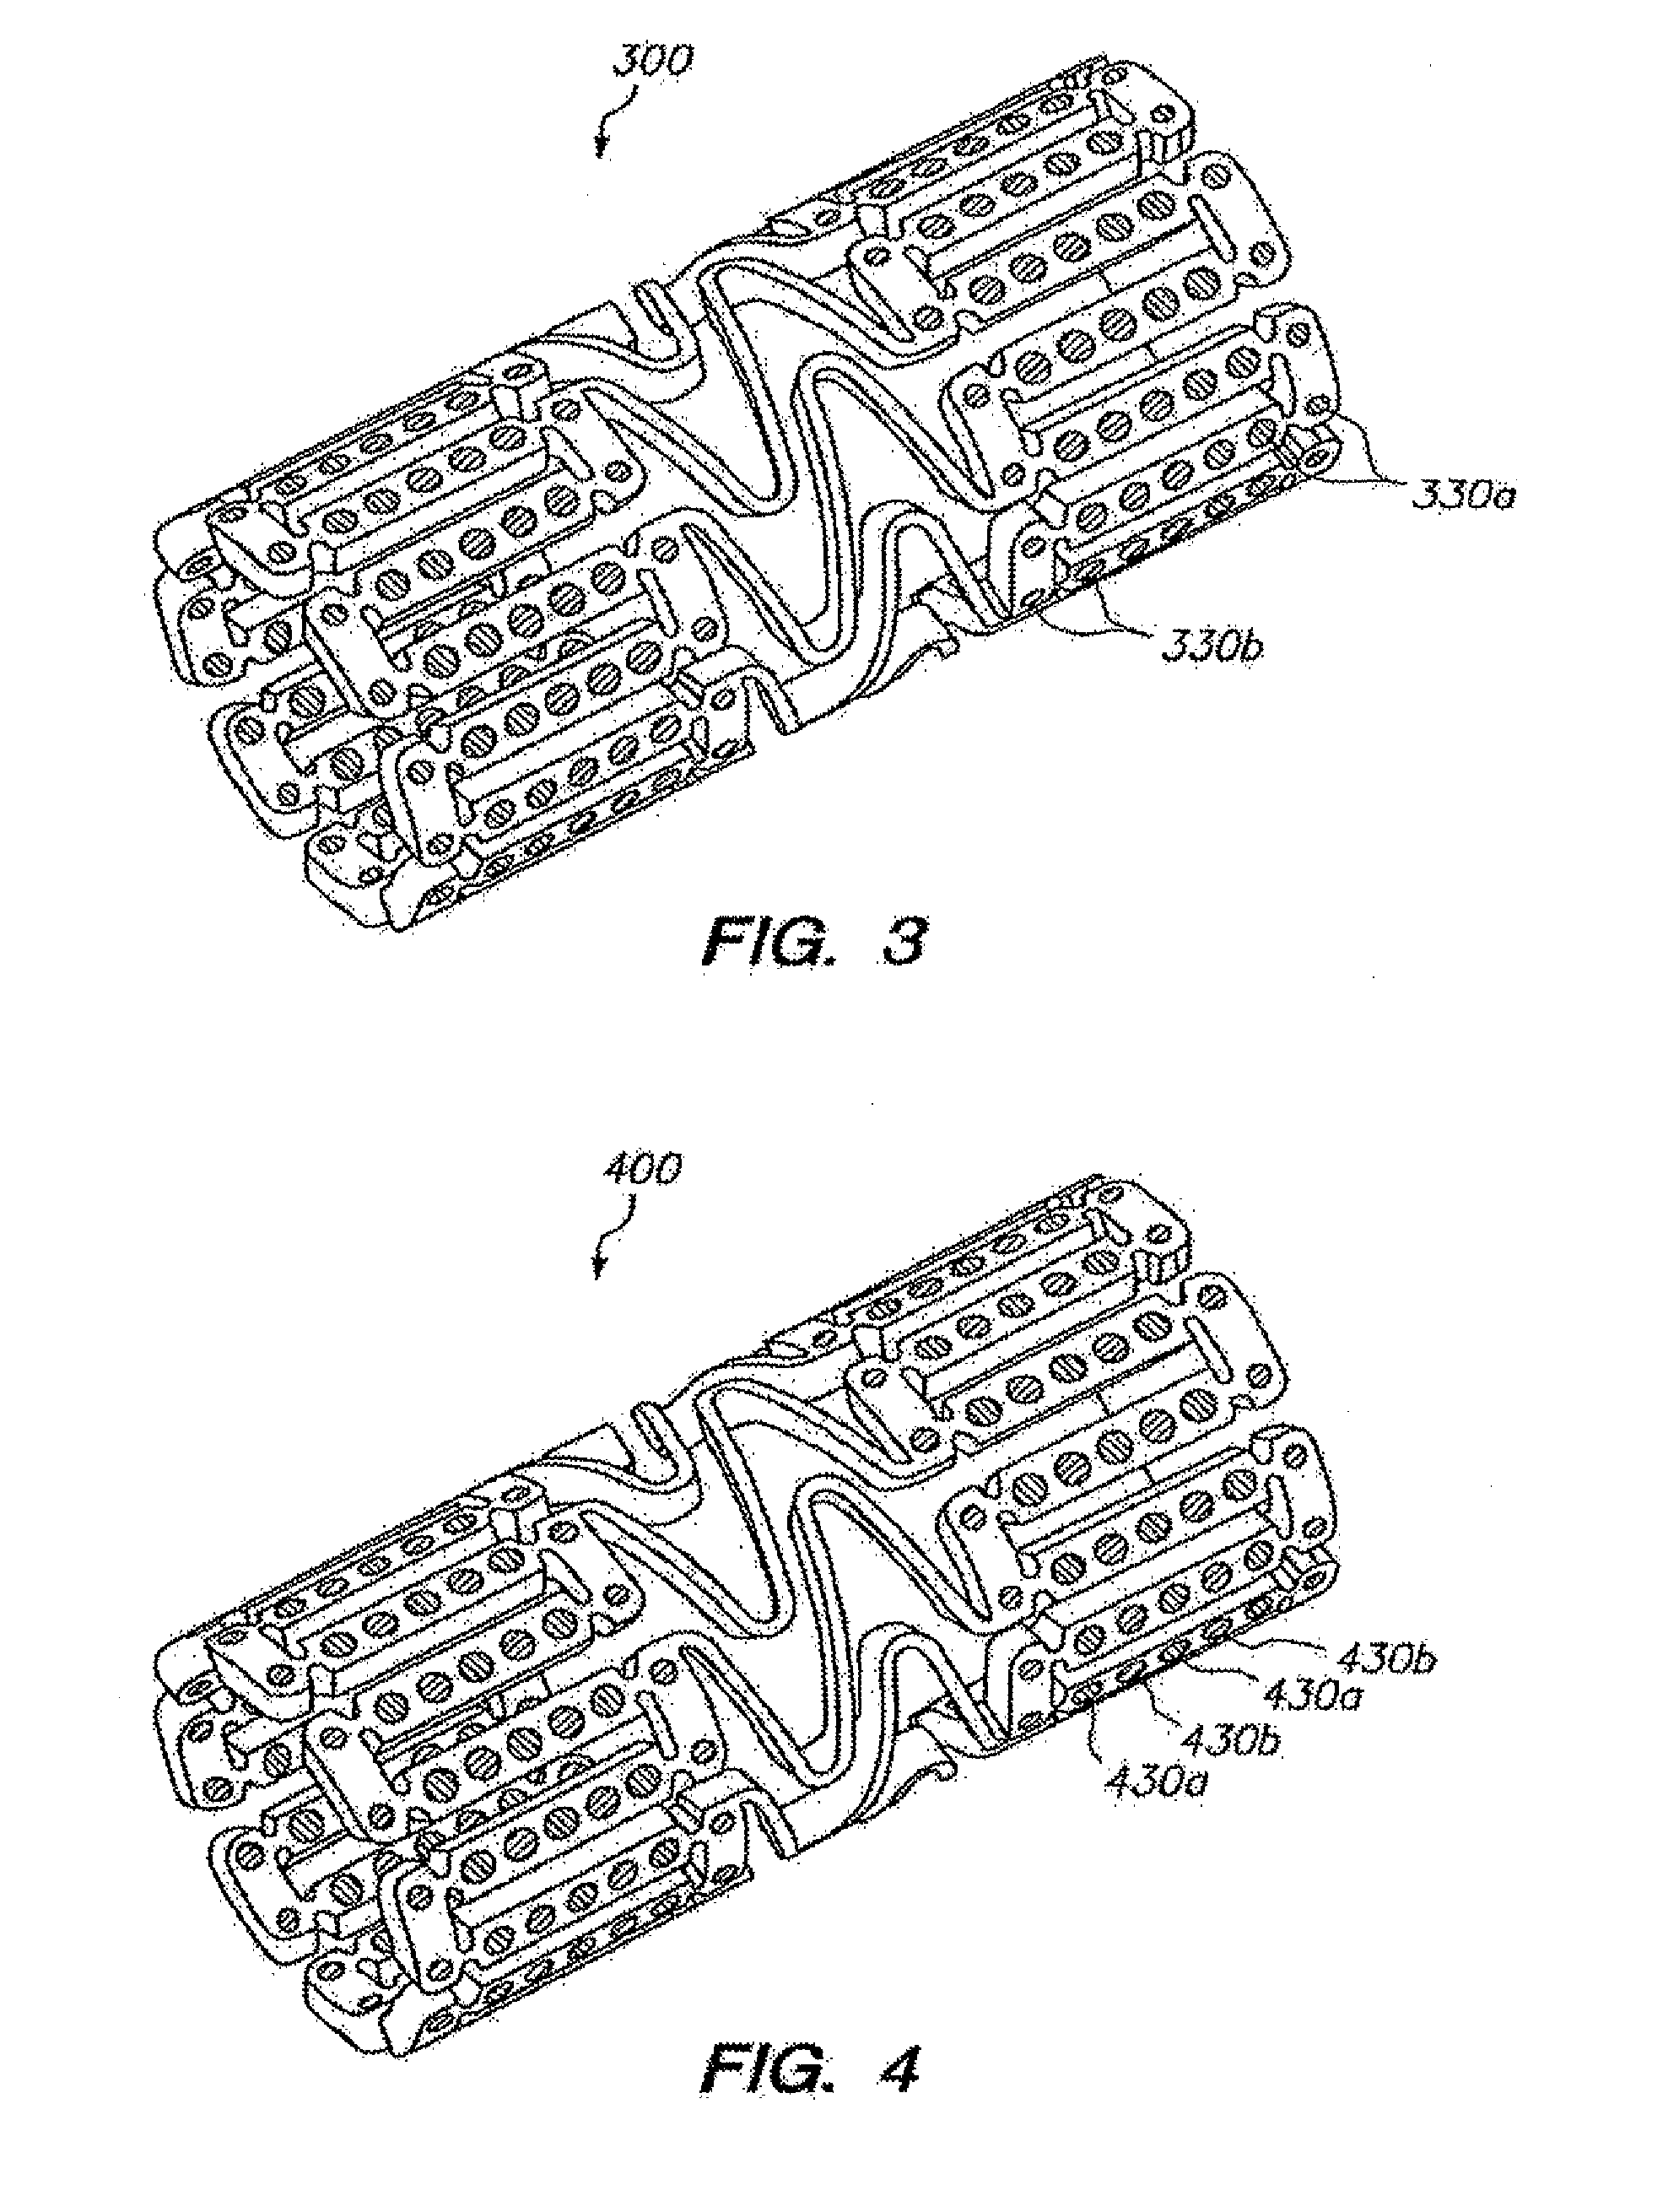 Adhesion promoting temporary mask for coated surfaces